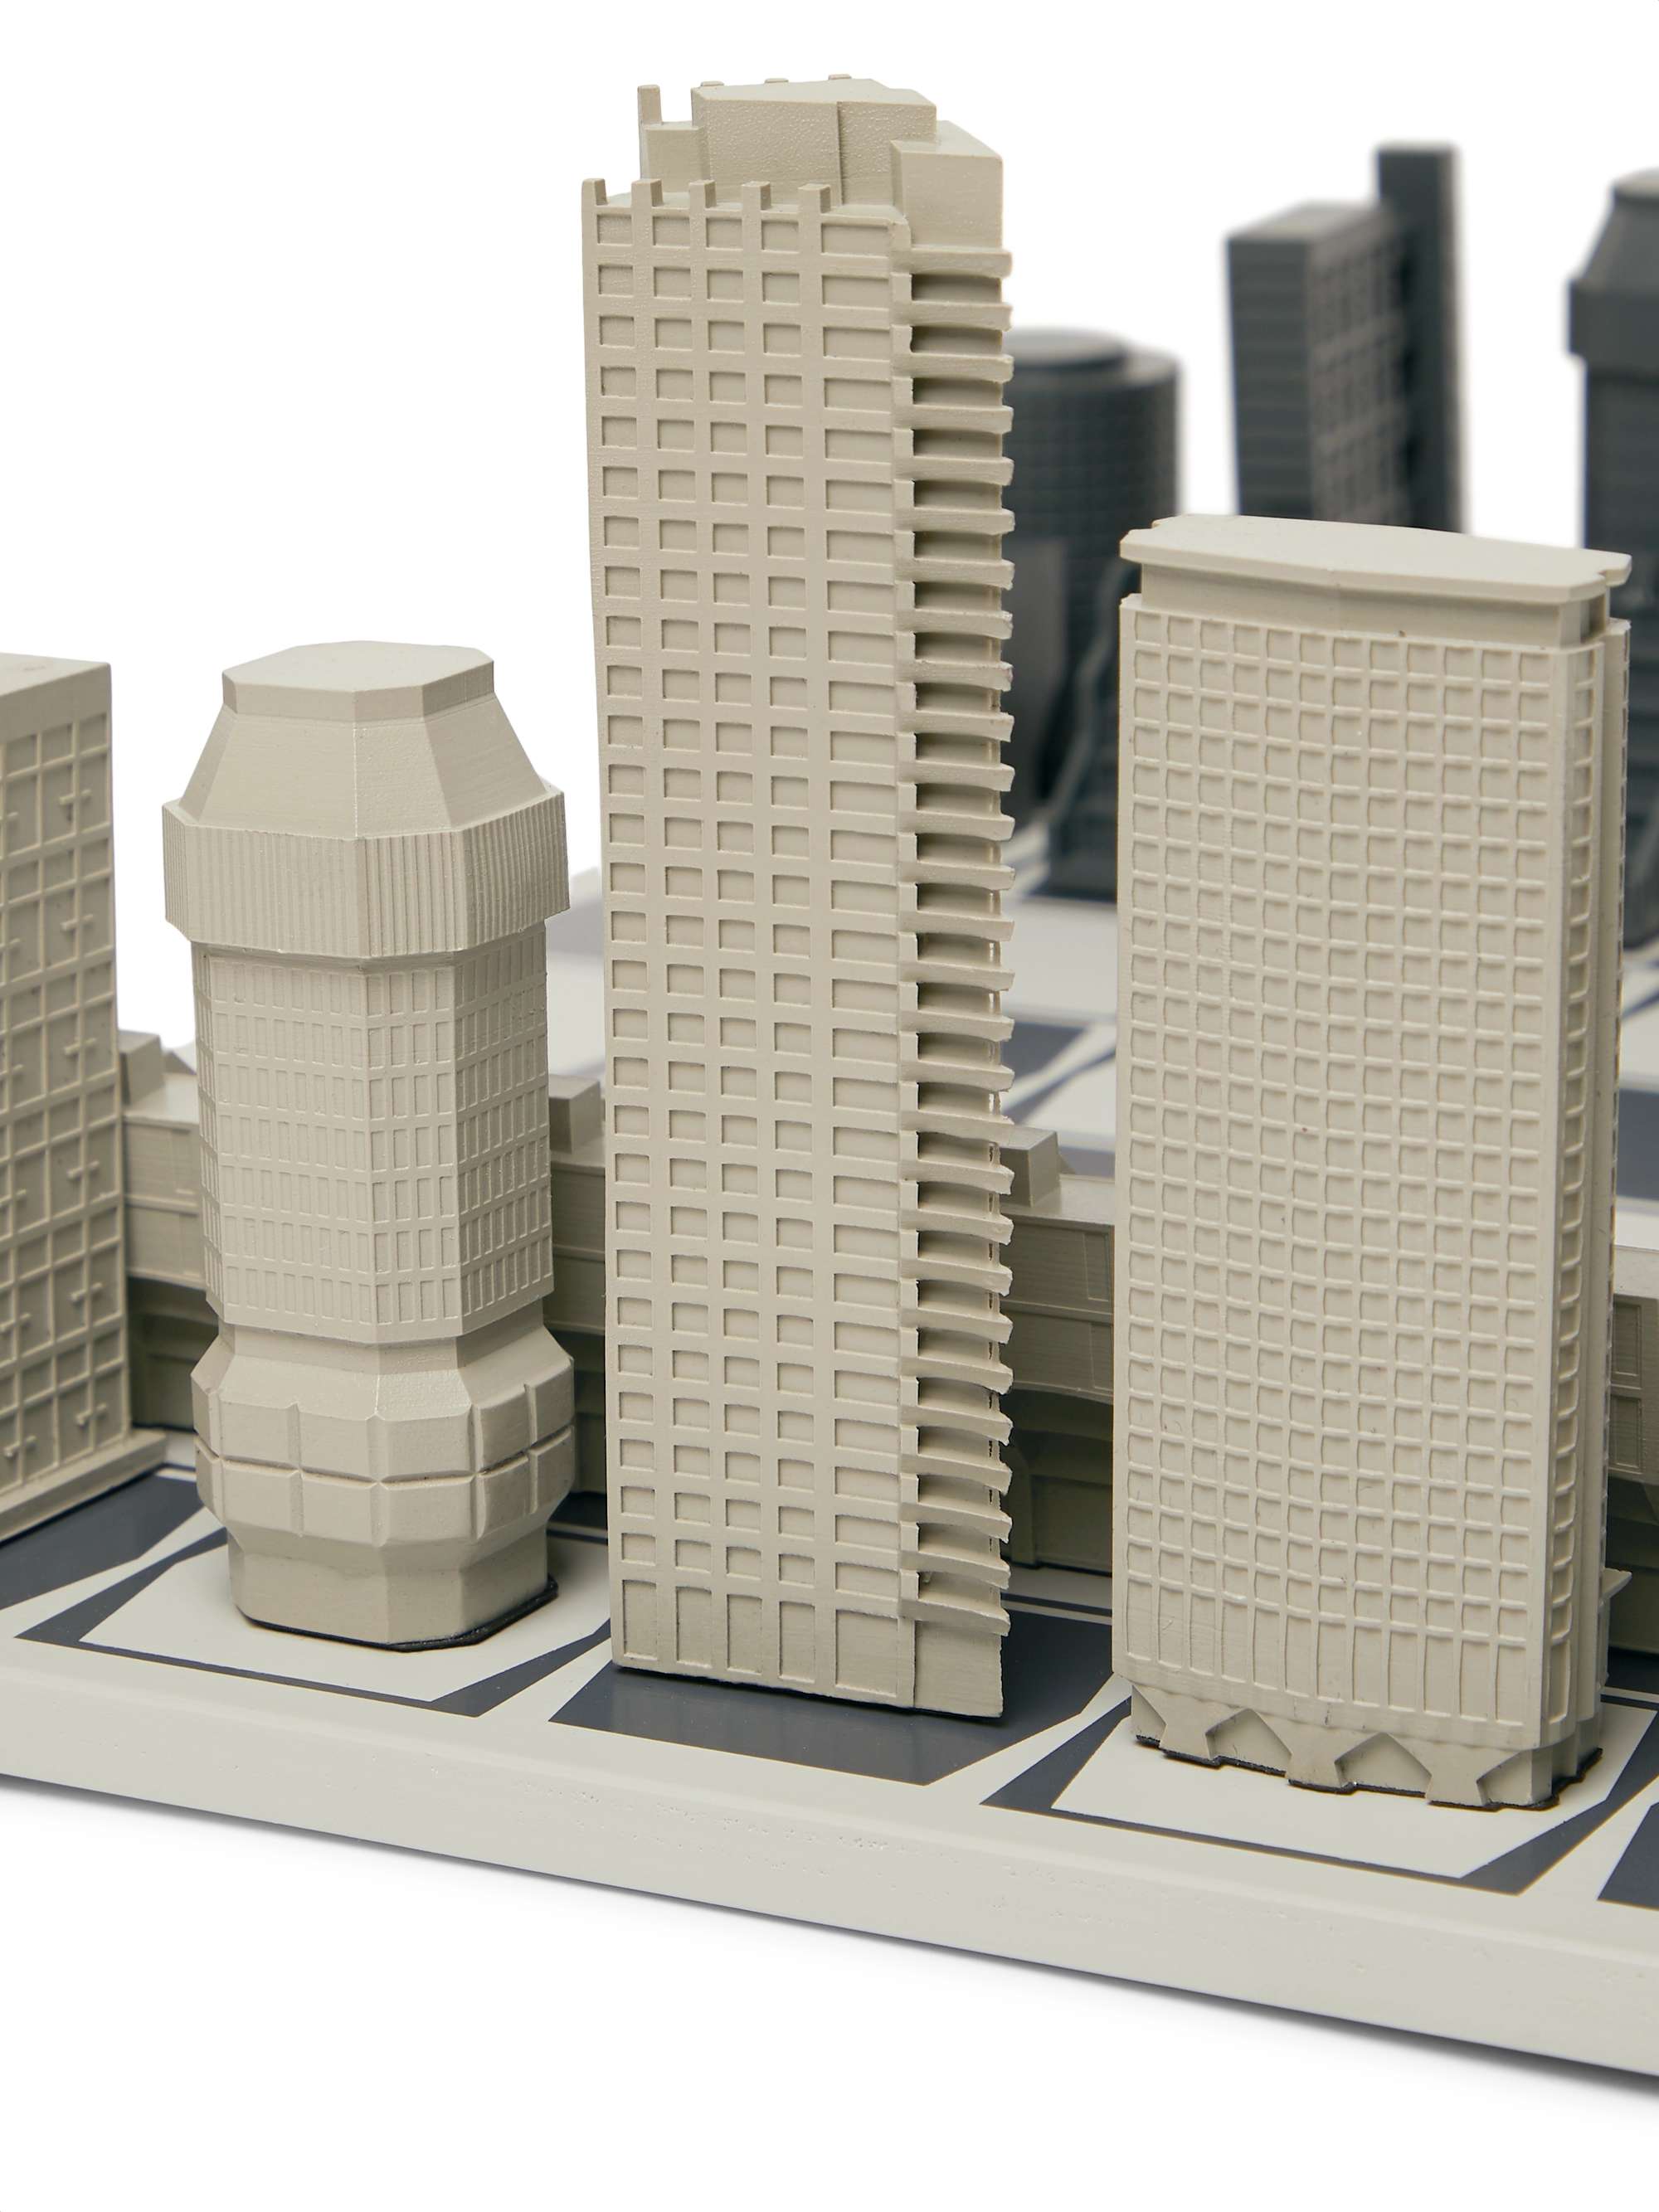 SKYLINE CHESS London Brutalist Edition Resin and Wood Chess Set